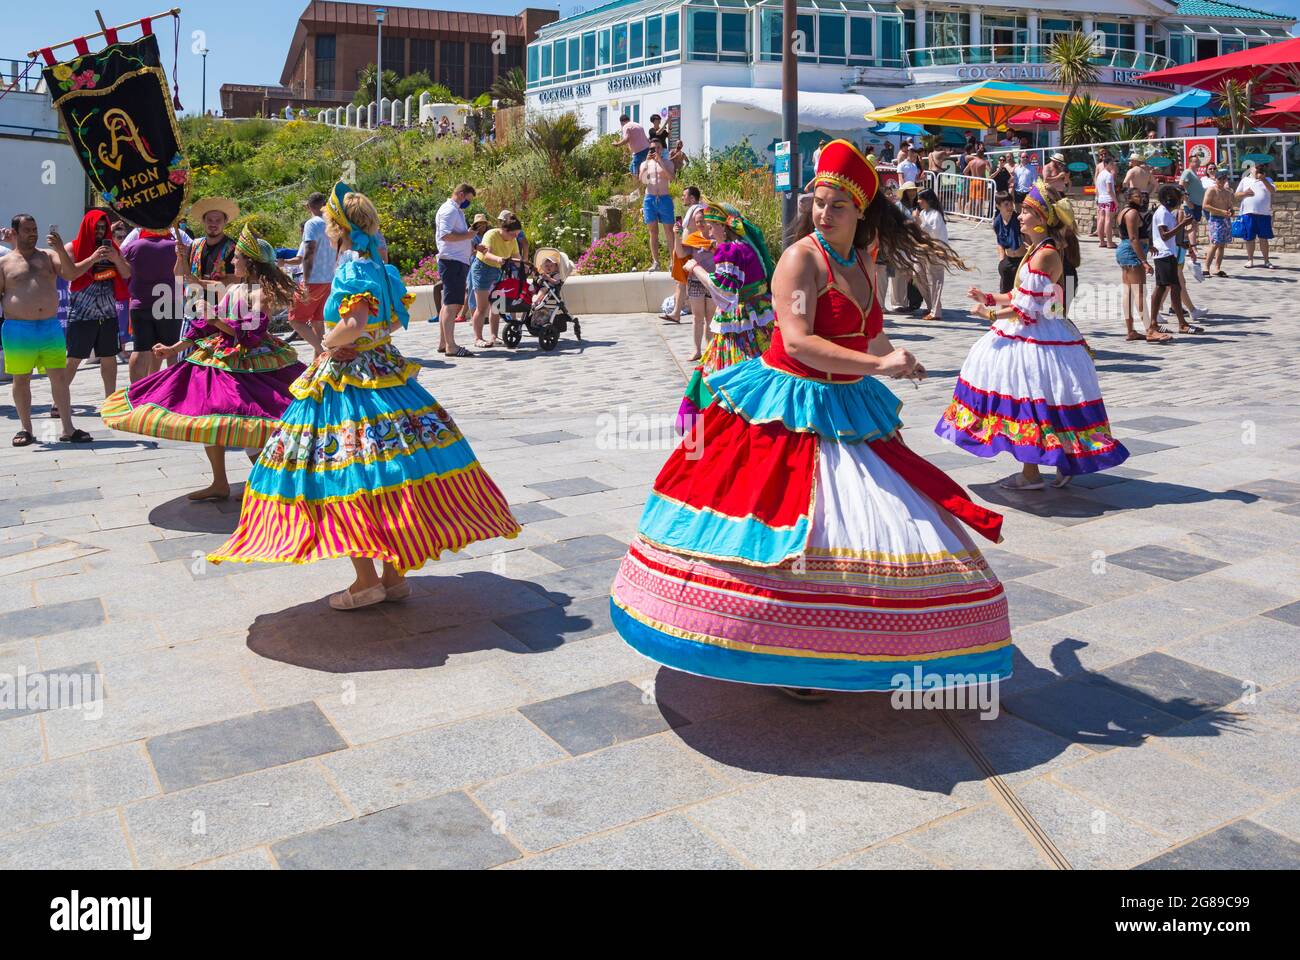 Bournemouth, Dorset, UK. 18th July, 2021. Afon Sistema with their whirling dancers with colourful skirts play Maracatu, Samba's earthier cousin from Northeastern Brazilas perform as part of the Arts by the Sea Summer Series on a hot sunny crowded day at the seaside. Credit: Carolyn Jenkins/Alamy Live News Stock Photo